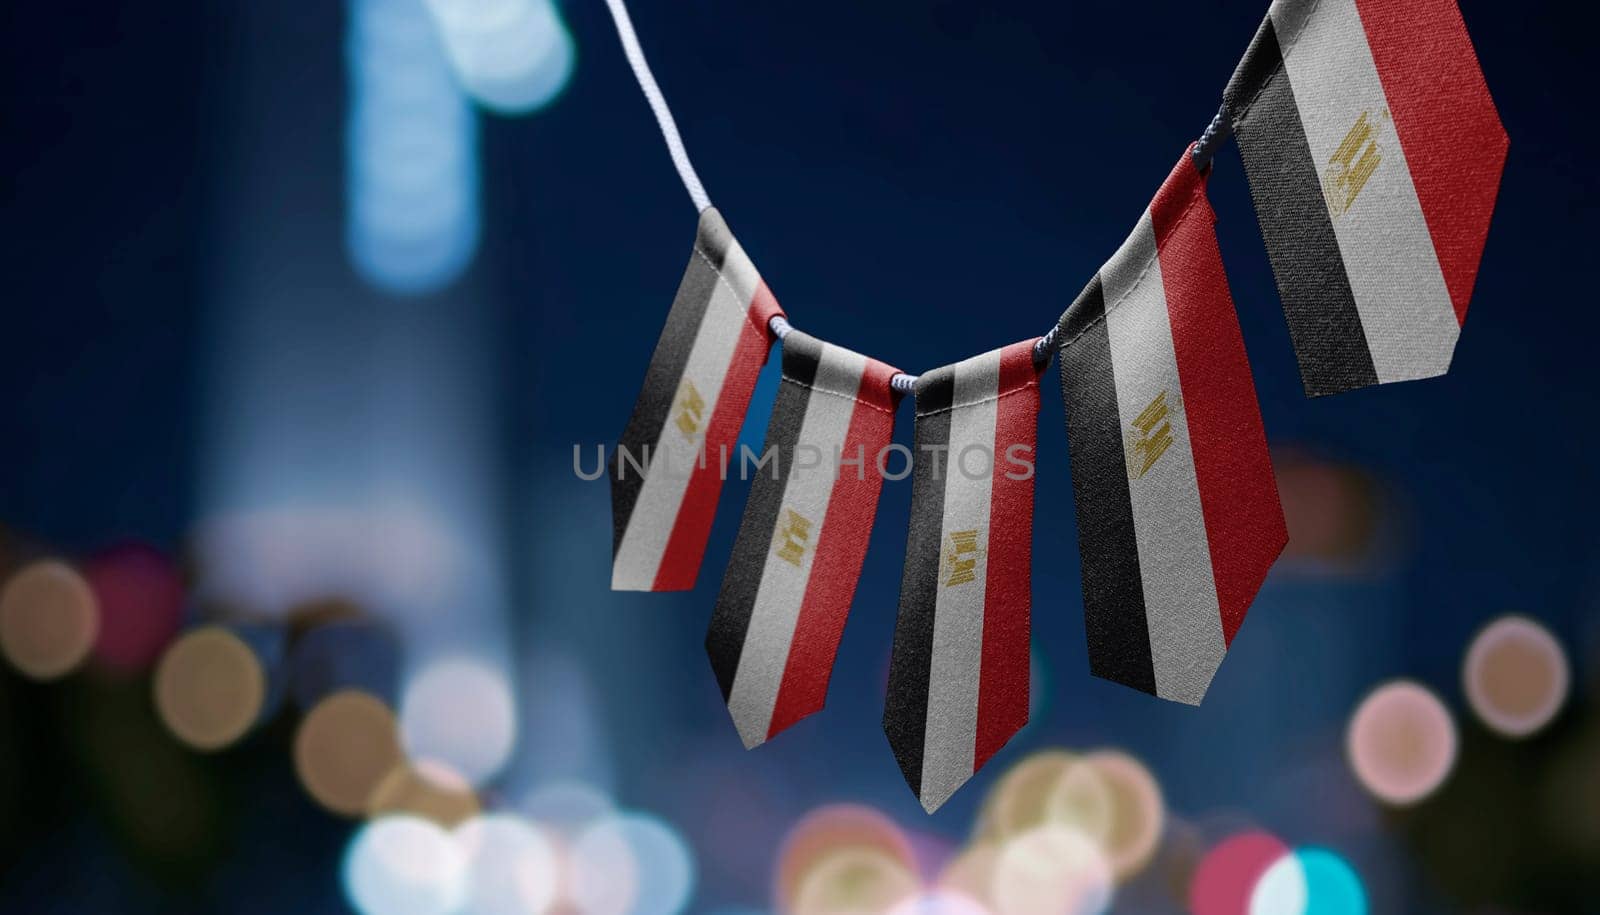 A garland of Egypt national flags on an abstract blurred background.